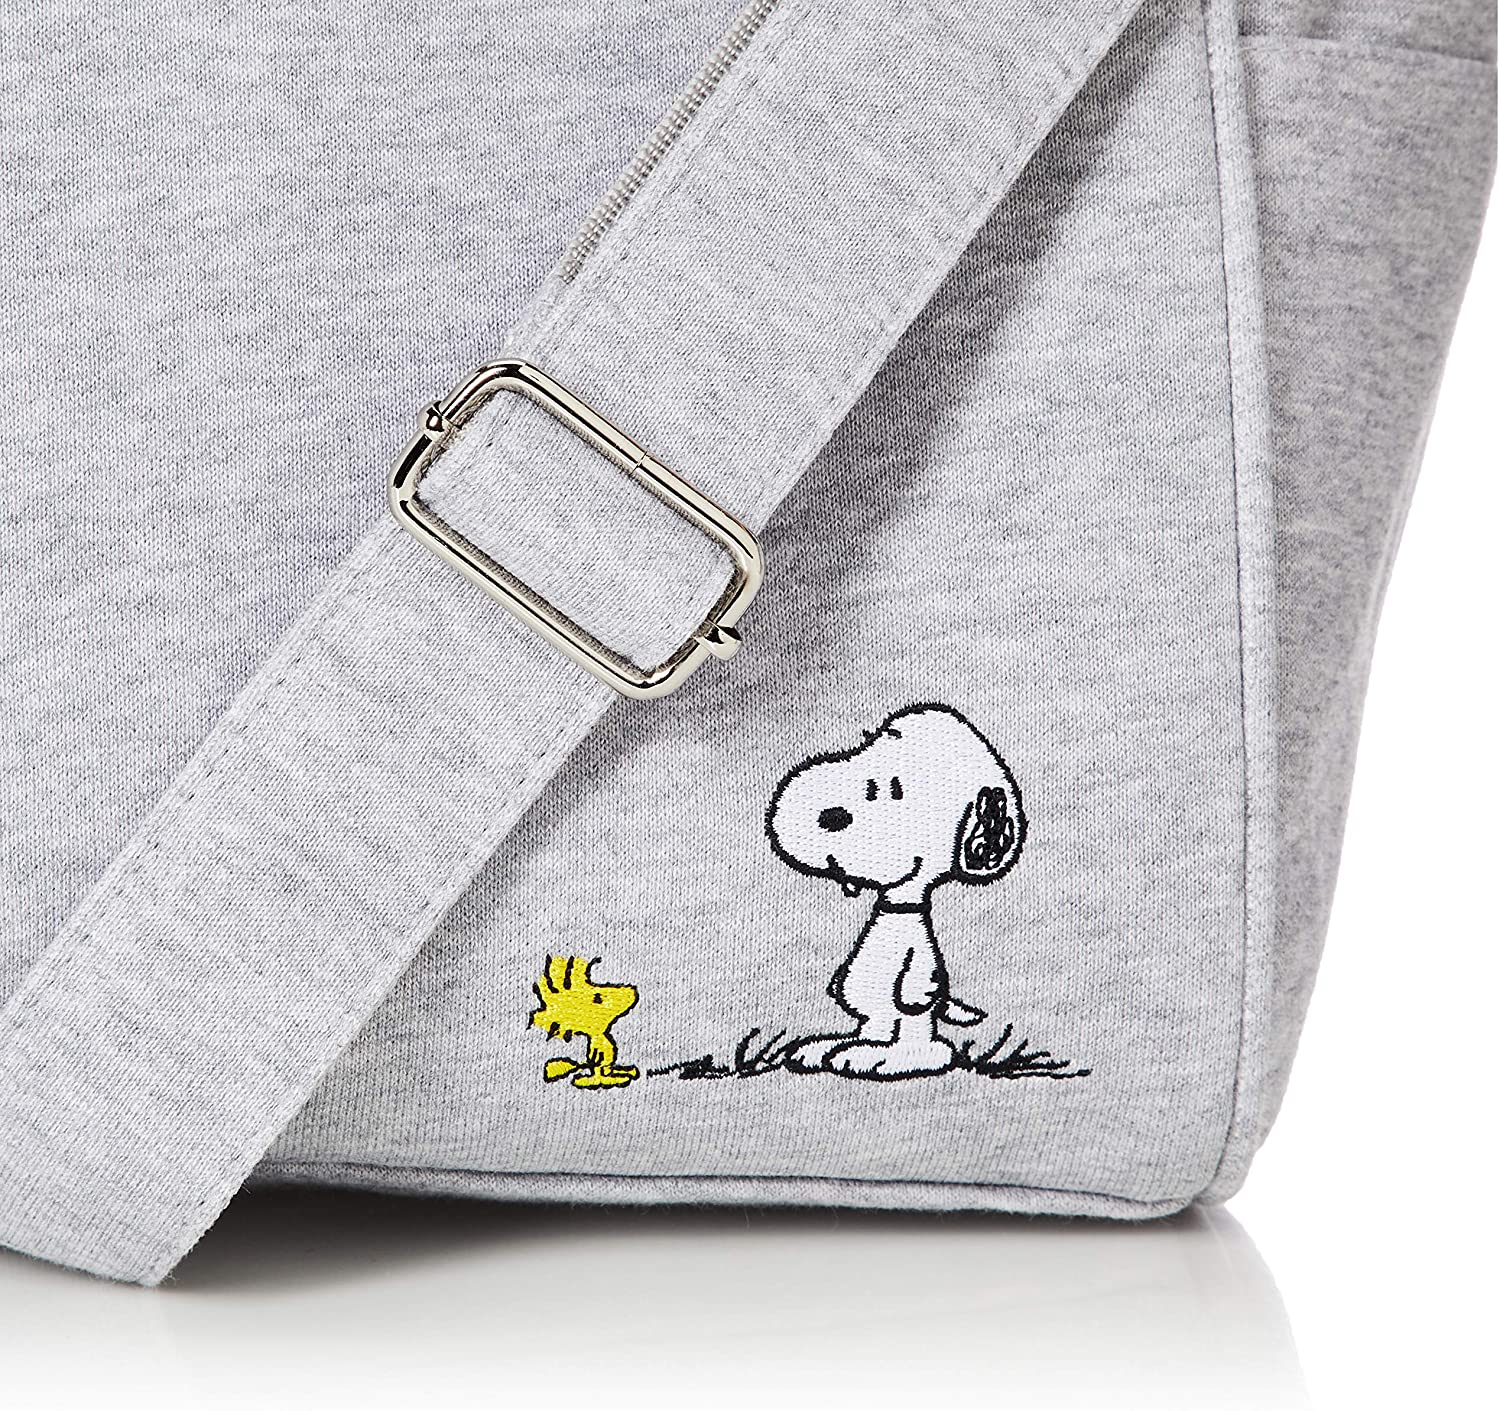 PEANUTS Snoopy Handbag With Adjustable Shoulder Strap Featuring Pebbled  Faux Leather And A Charm